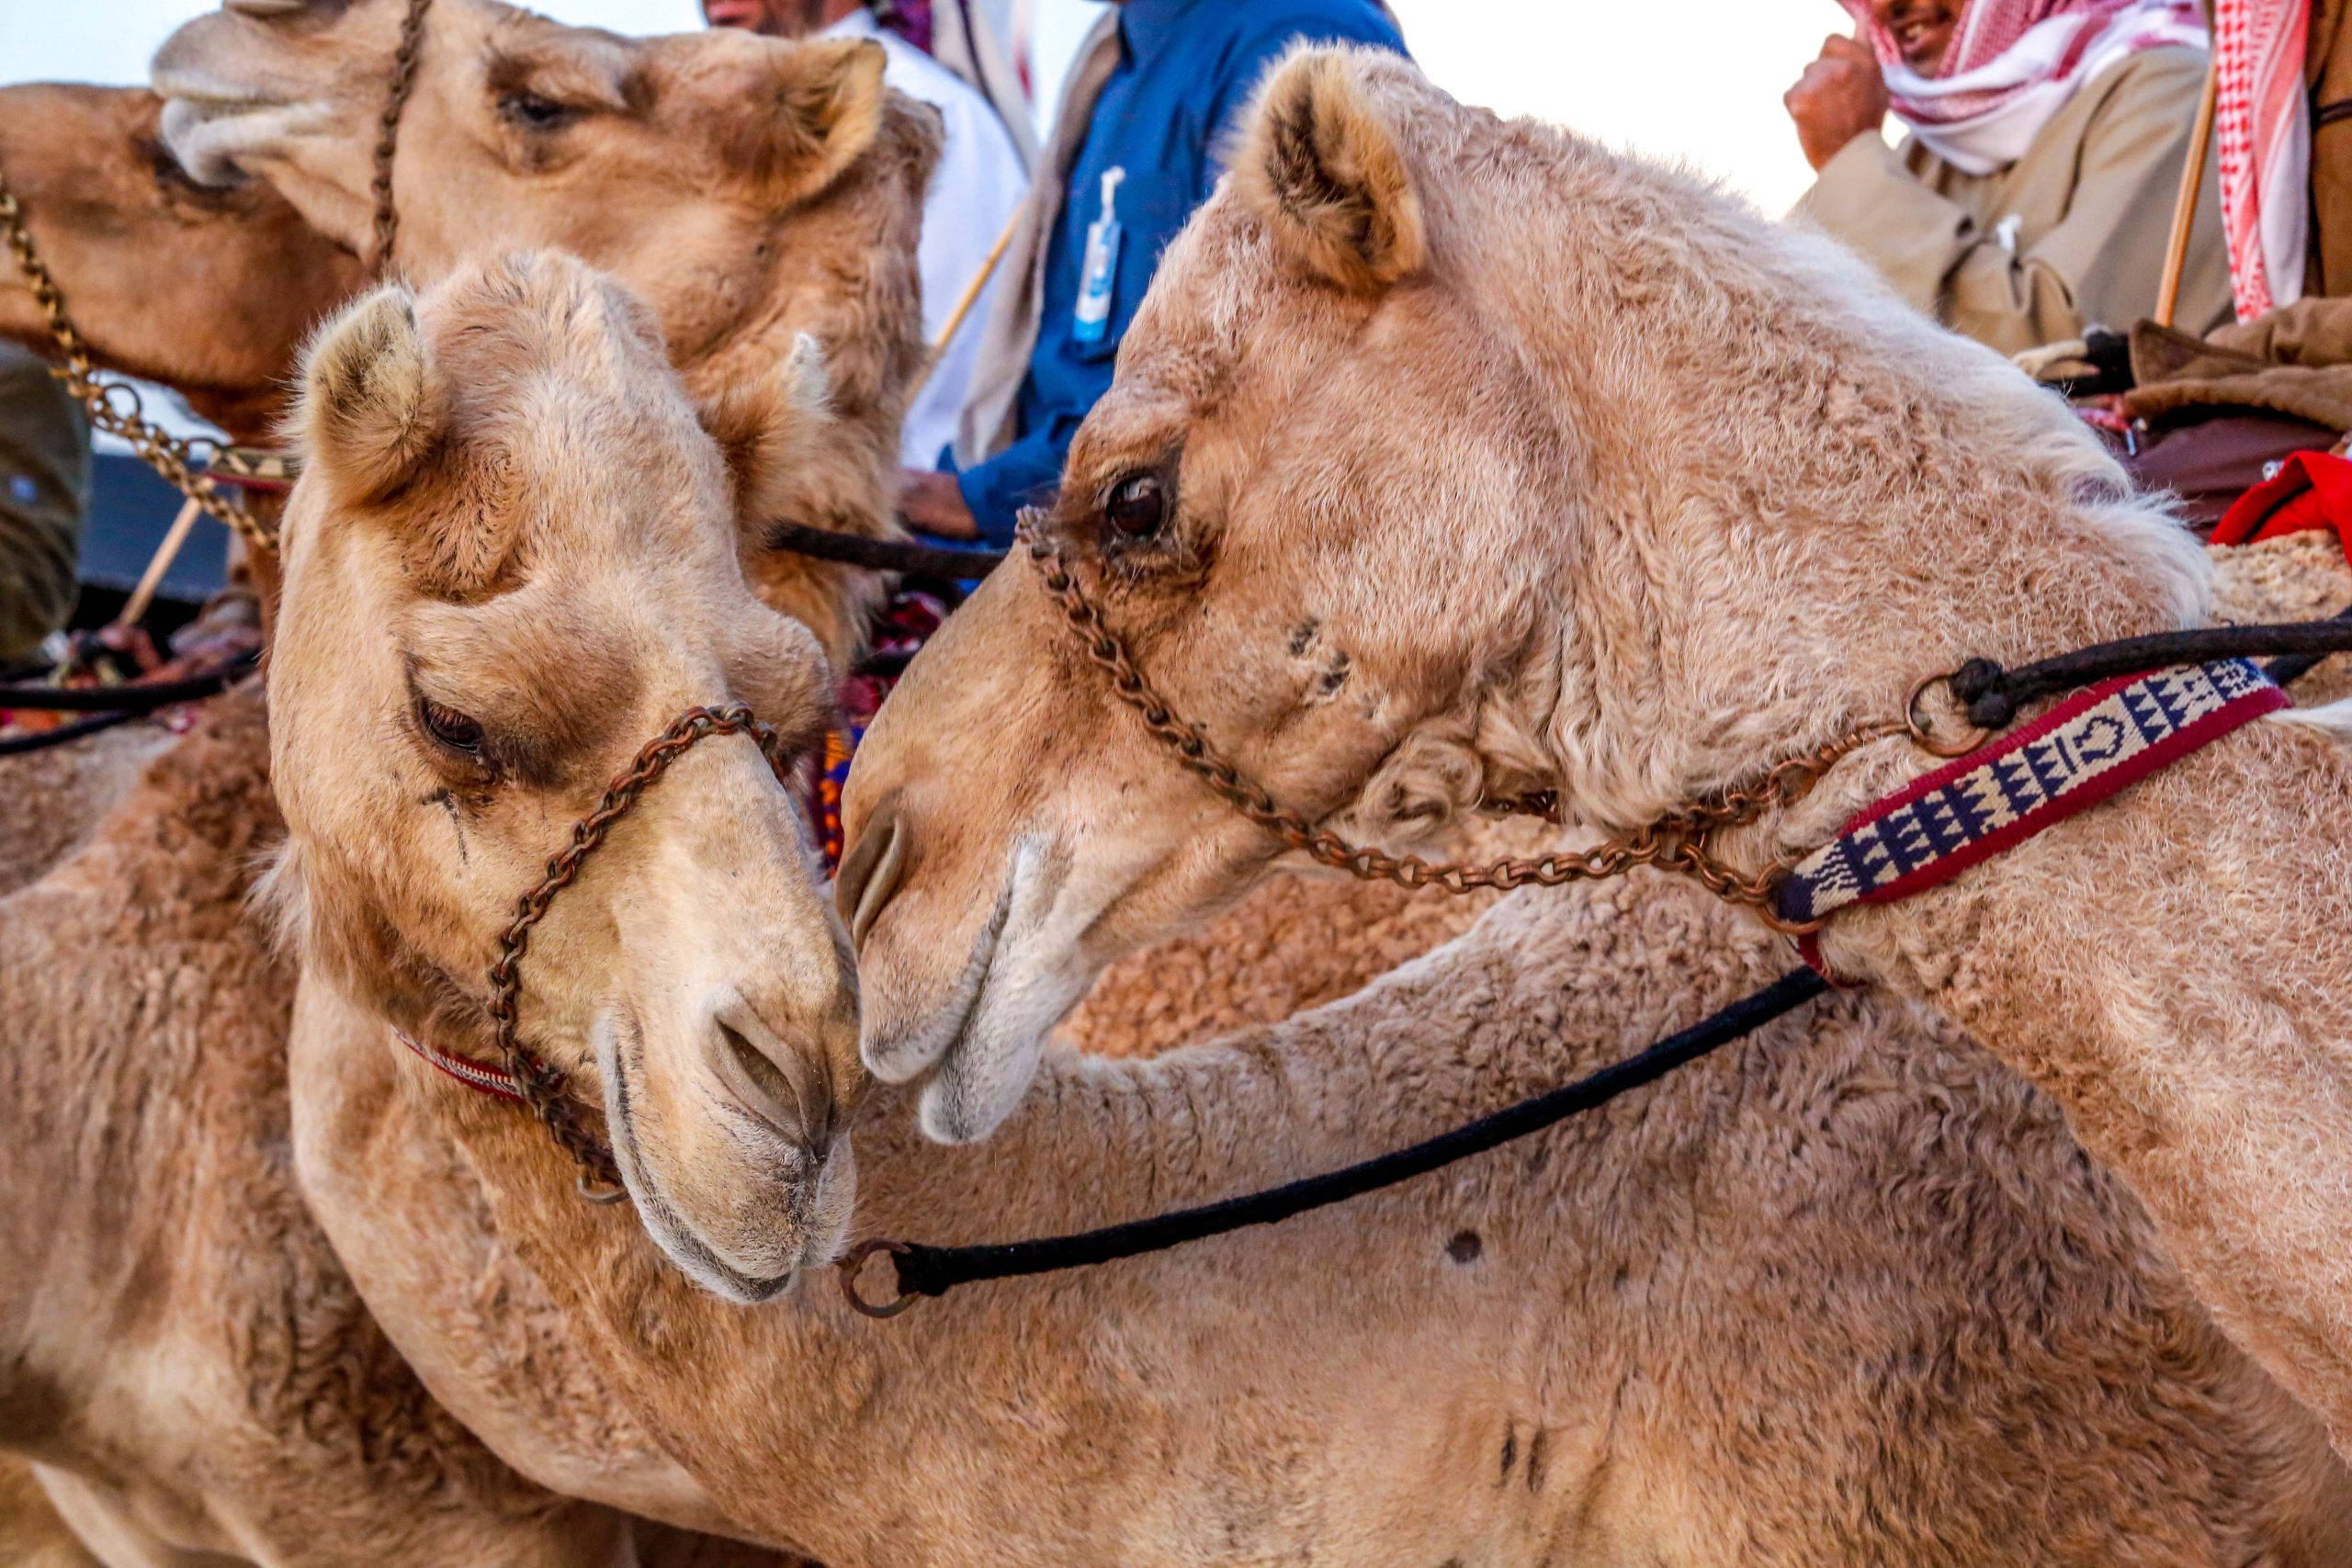 Sports modernisation: Qatar takes camel services online with new app